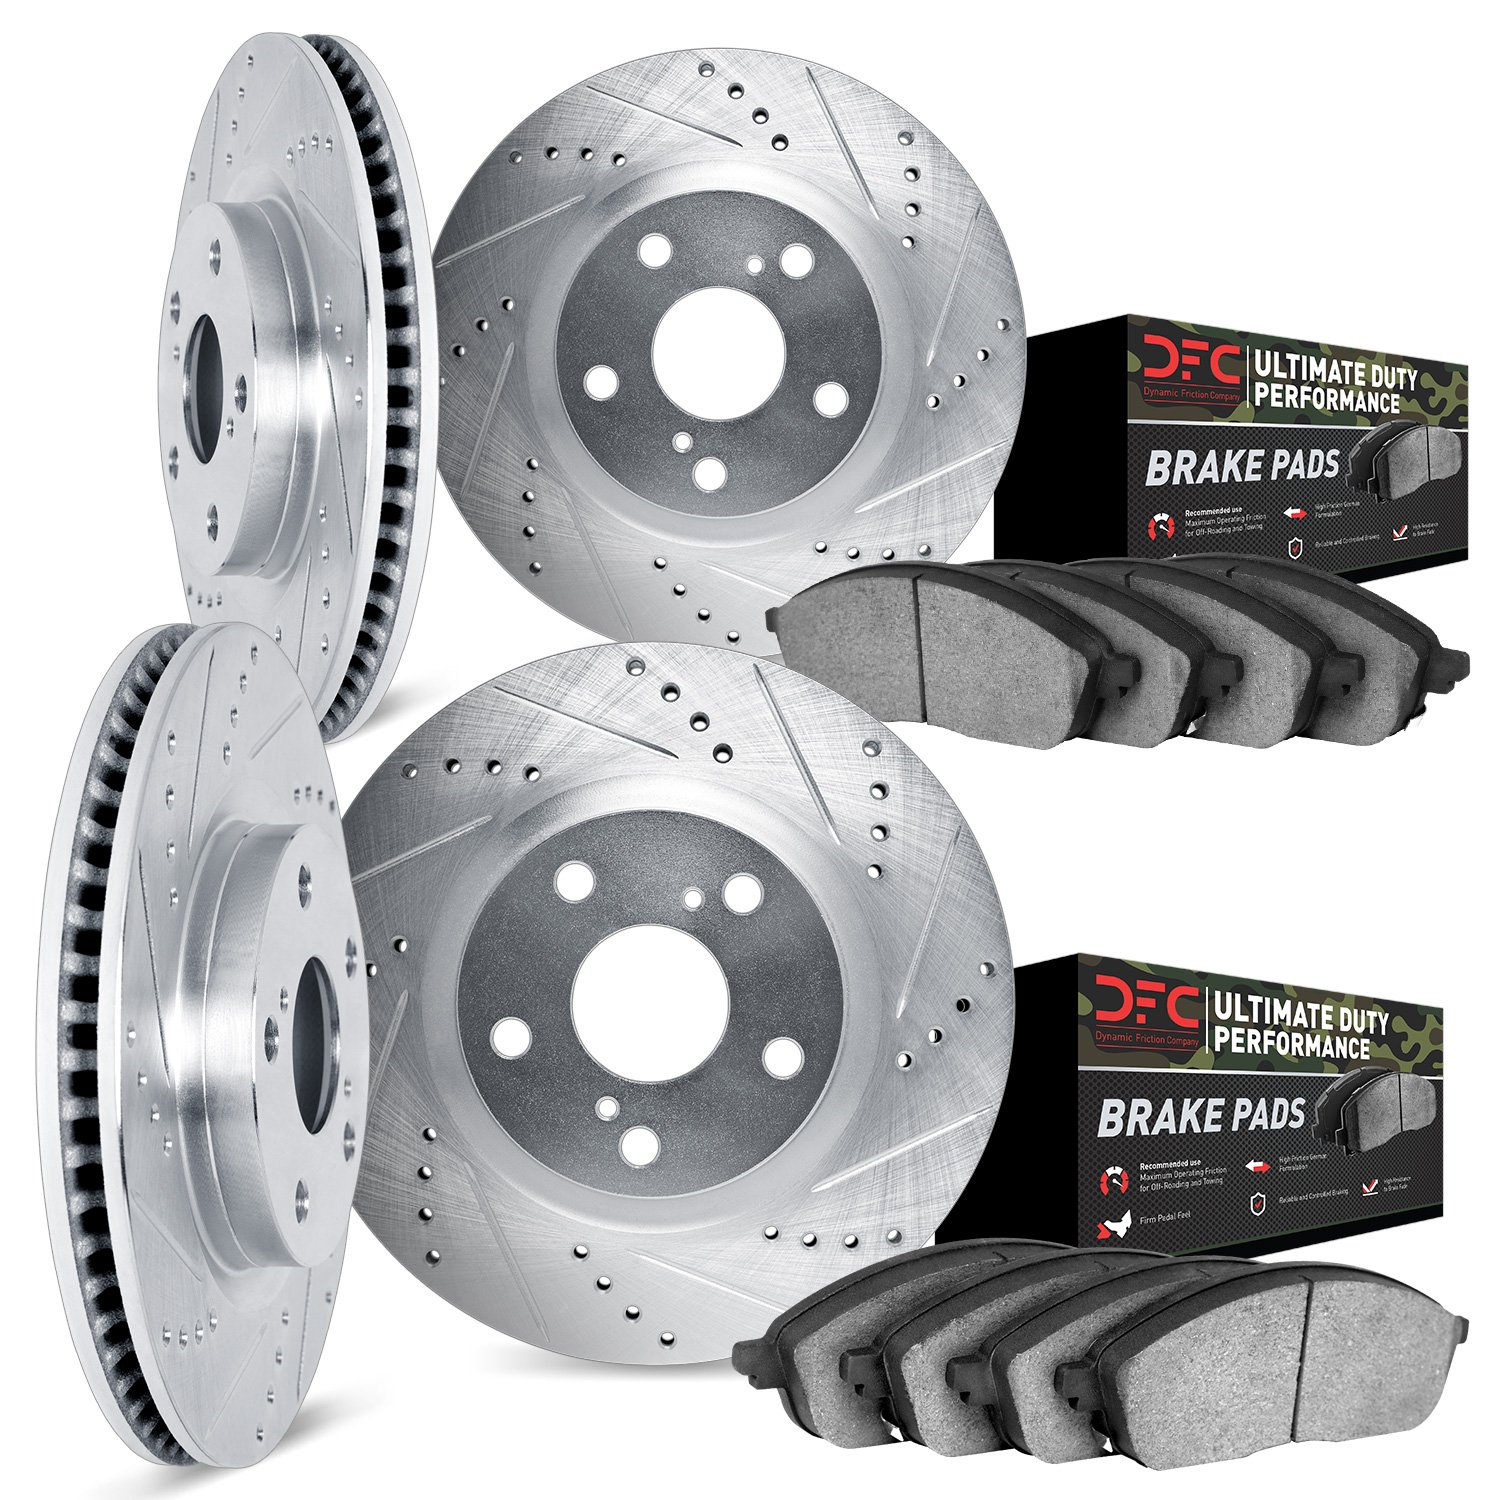 7404-40003 Drilled/Slotted Brake Rotors with Ultimate-Duty Brake Pads Kit [Silver], 2008-2012 Mopar, Position: Front and Rear